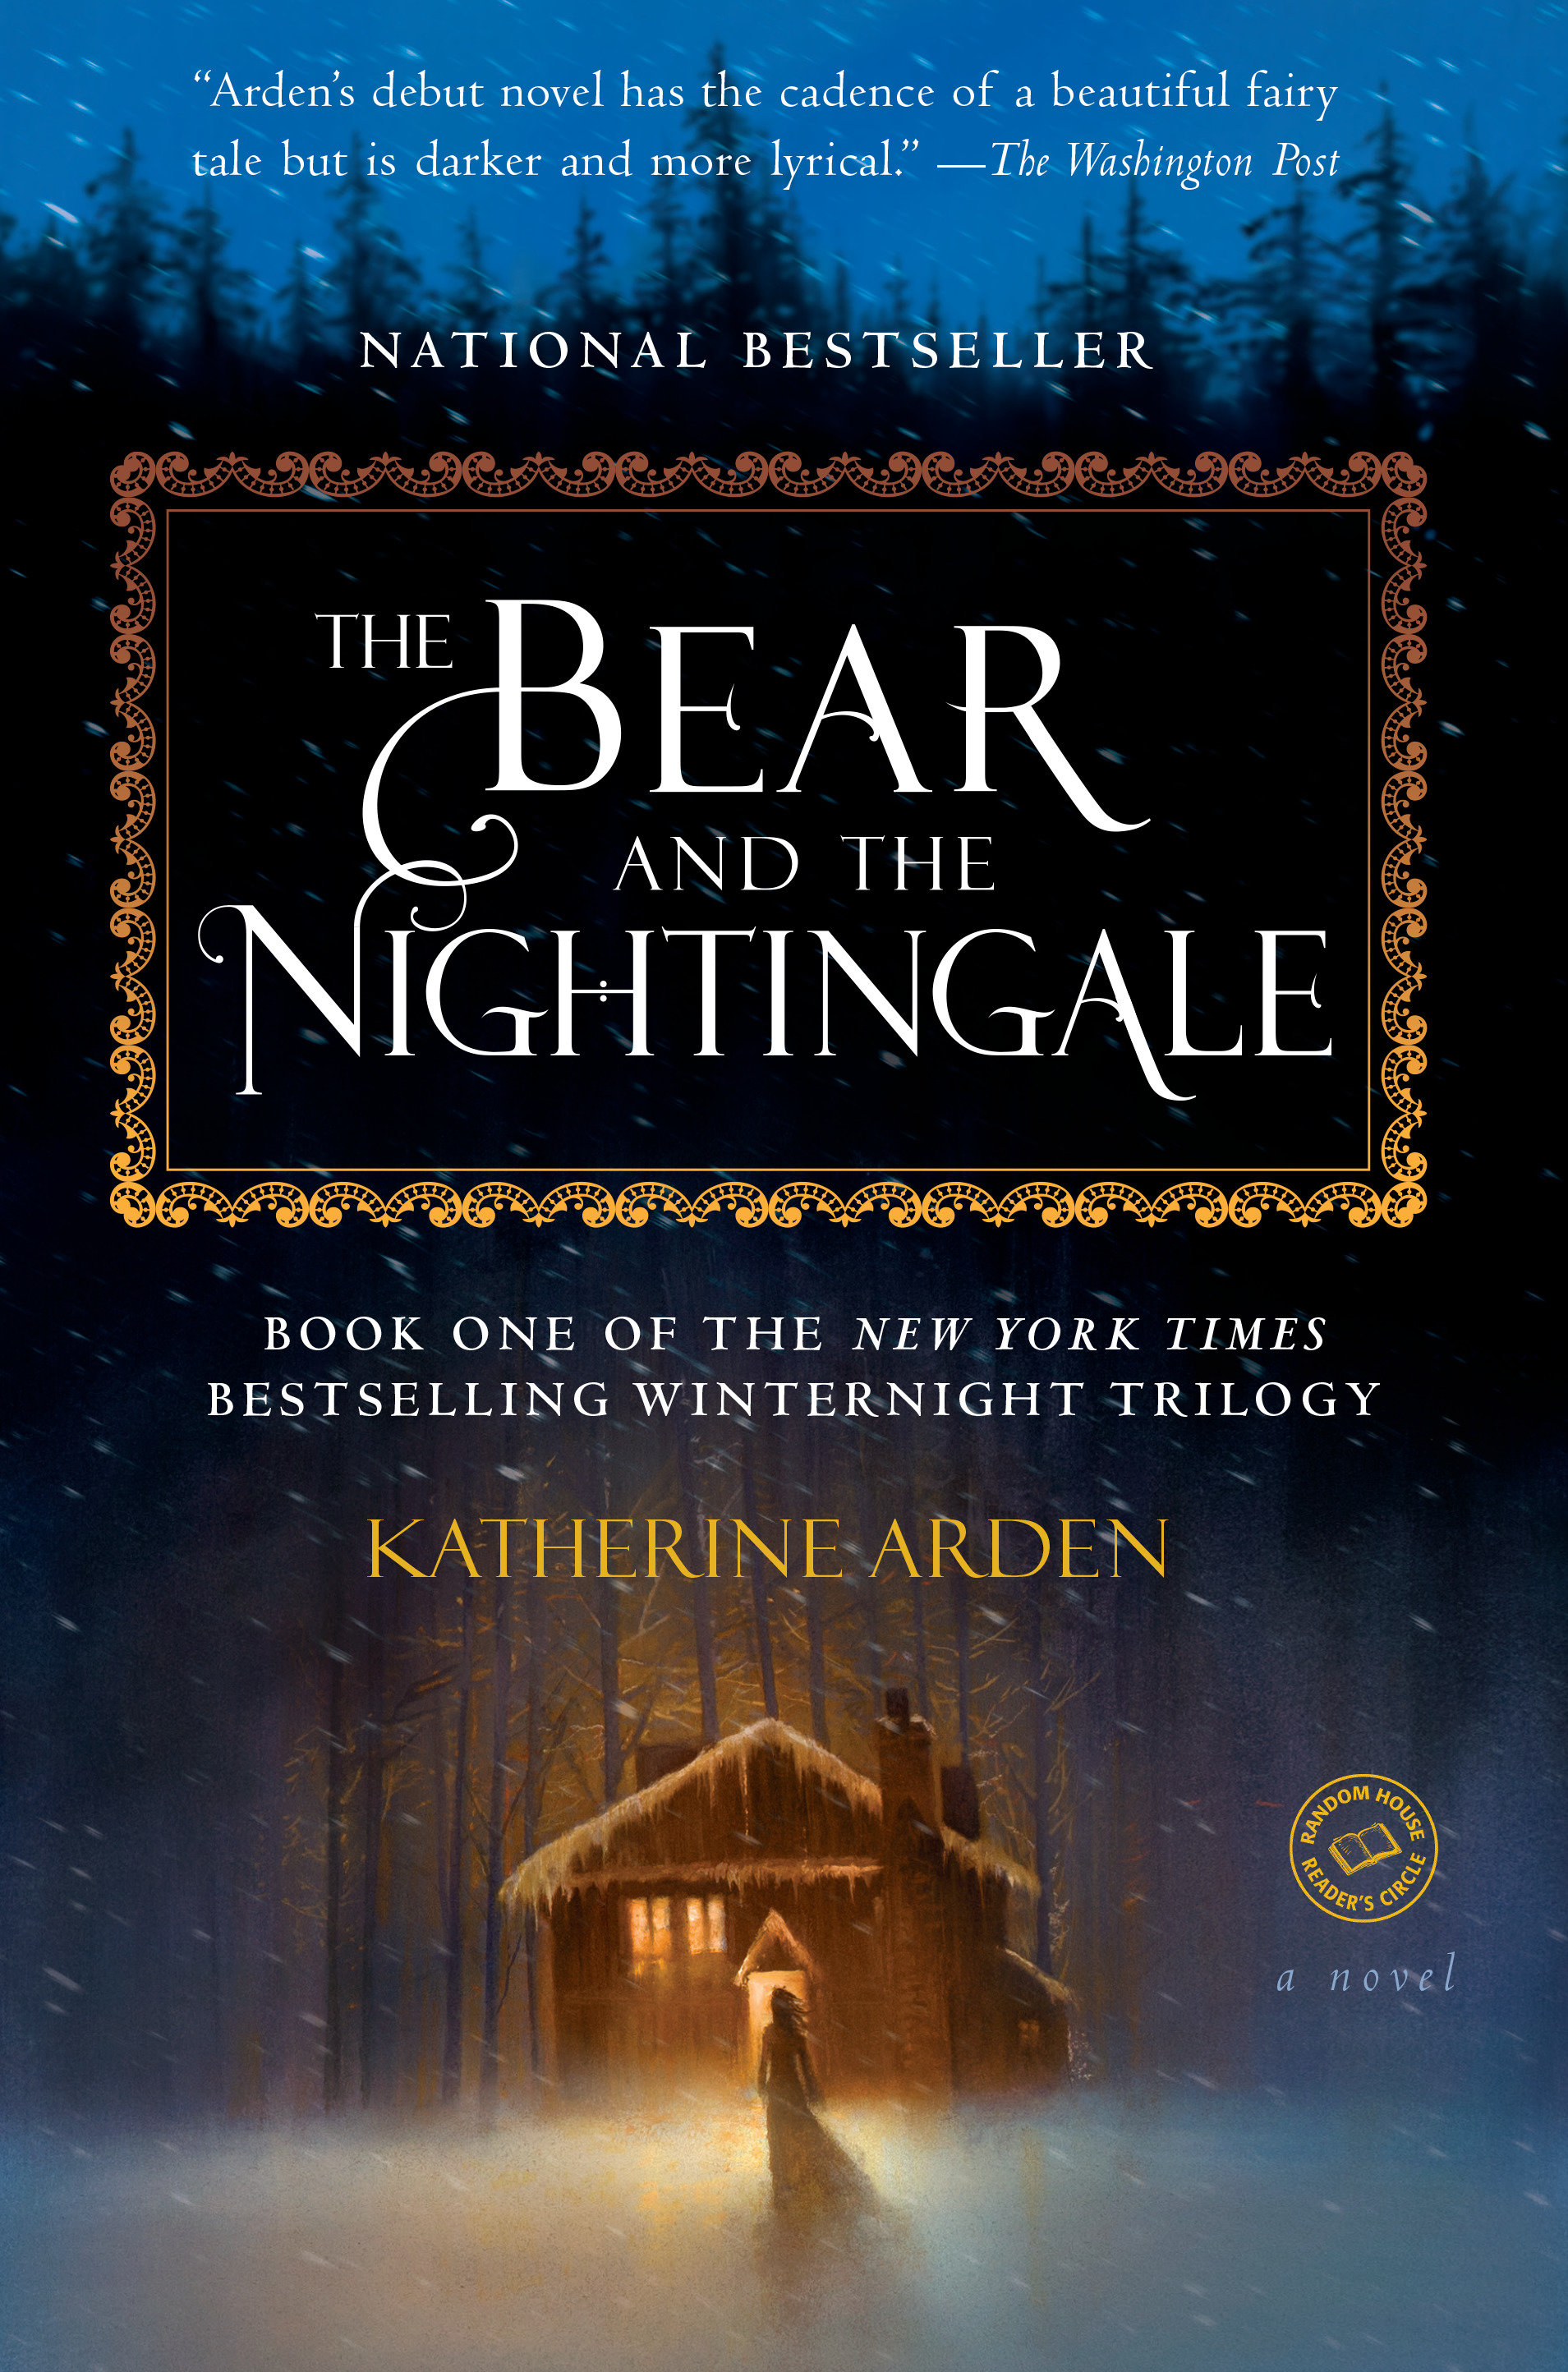 Image de couverture de The Bear and the Nightingale [electronic resource] : A Novel